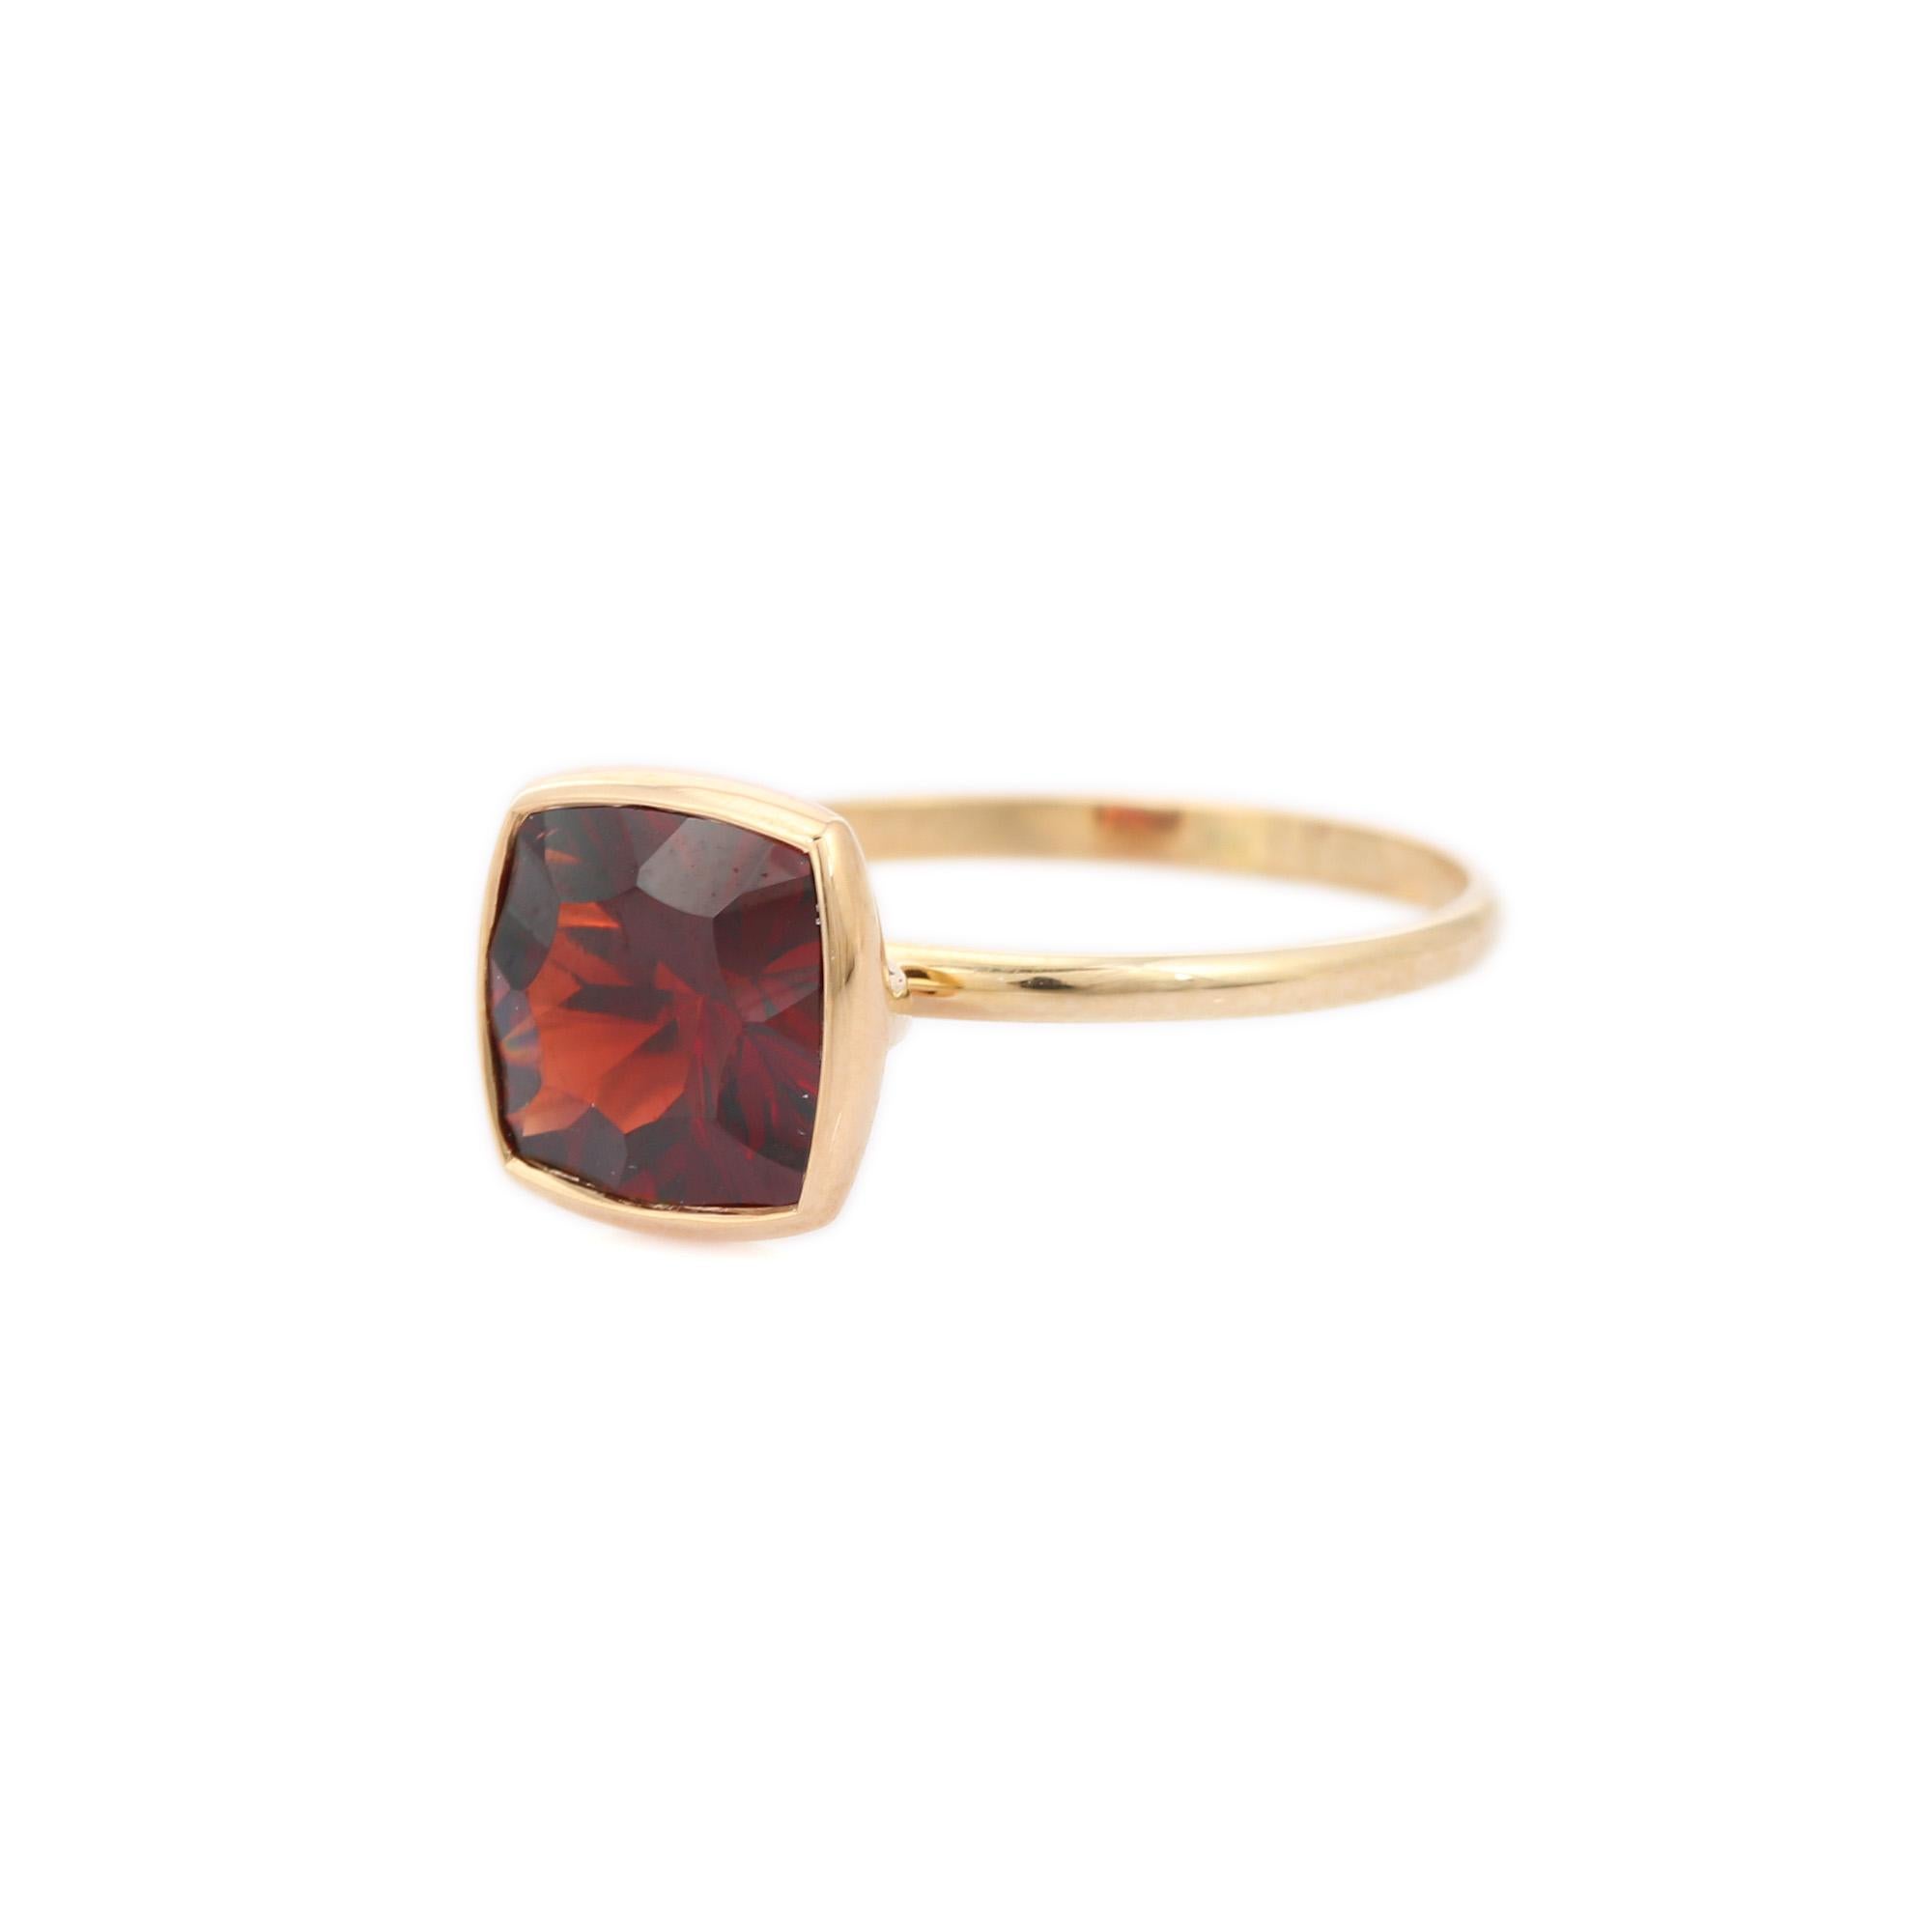 For Sale:  2.85 Carat Garnet Solitaire Ring in 14K Yellow Gold 2